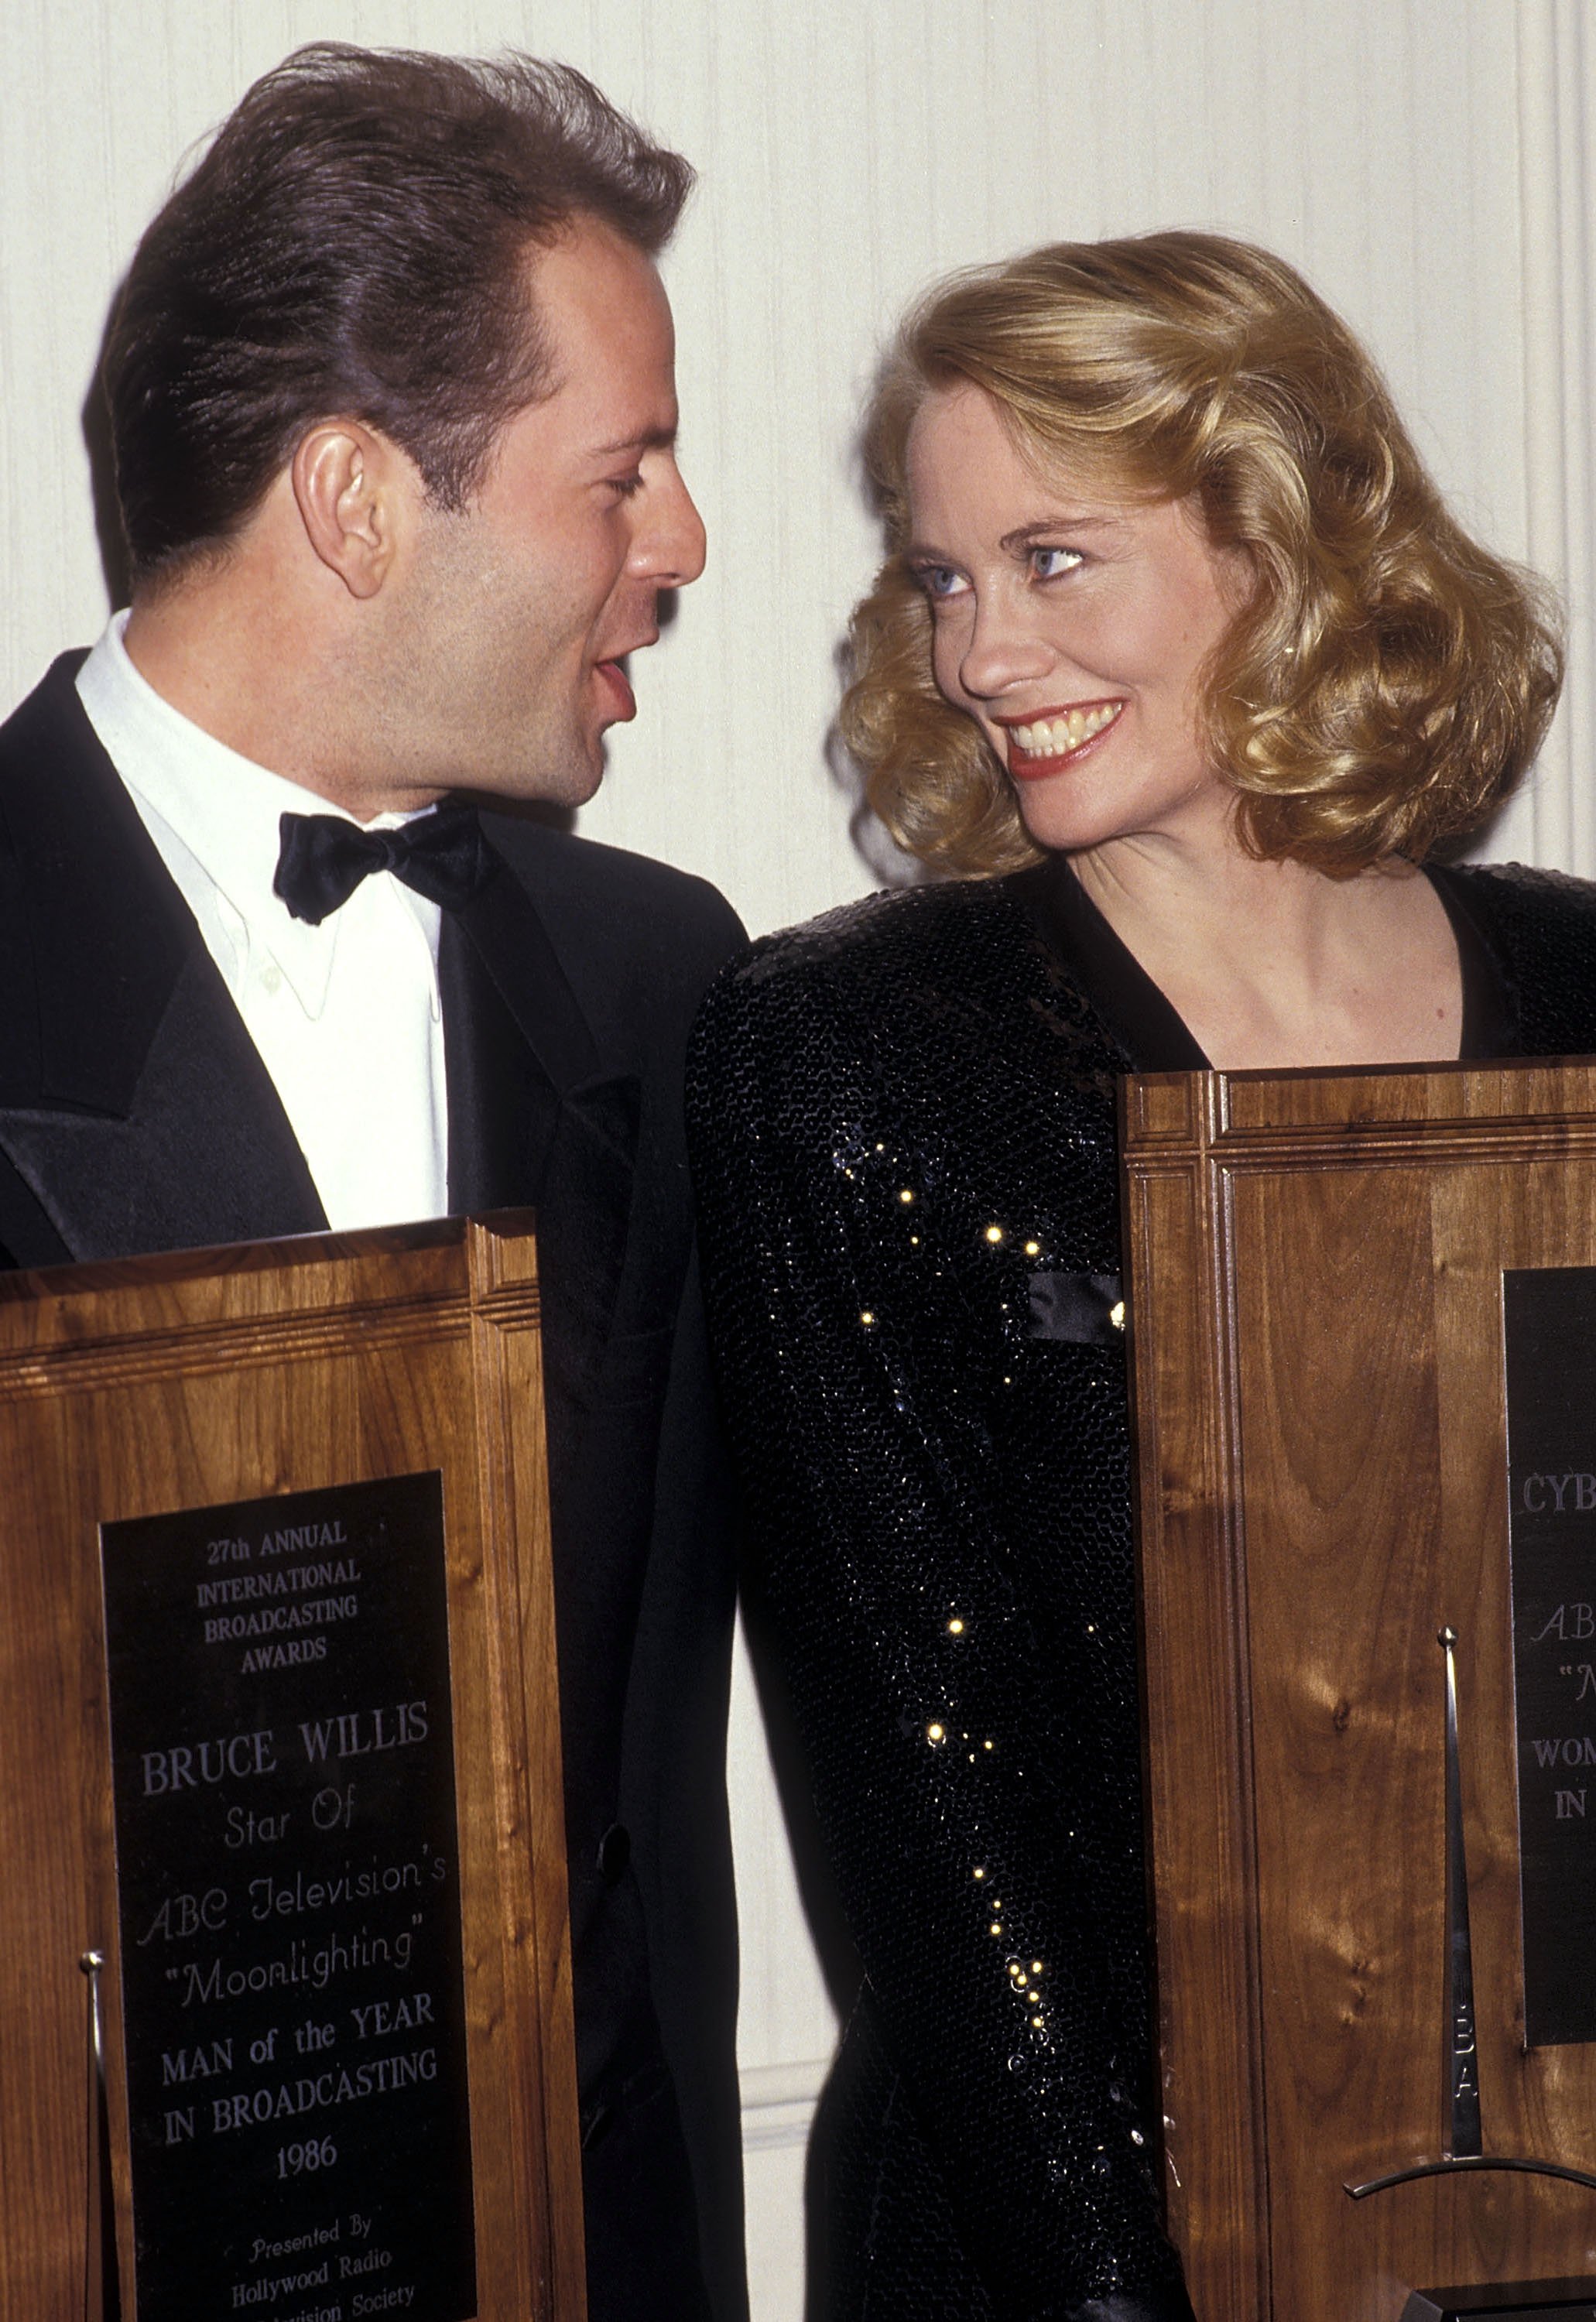 Bruce Willis and Cybill Shepherd attending the Hollywood Radio & Television Society's 27th Annual International Broadcasting Awards at Century Plaza Hotel on March 17, 1987 in Los Angeles, California. / Source: Getty Images